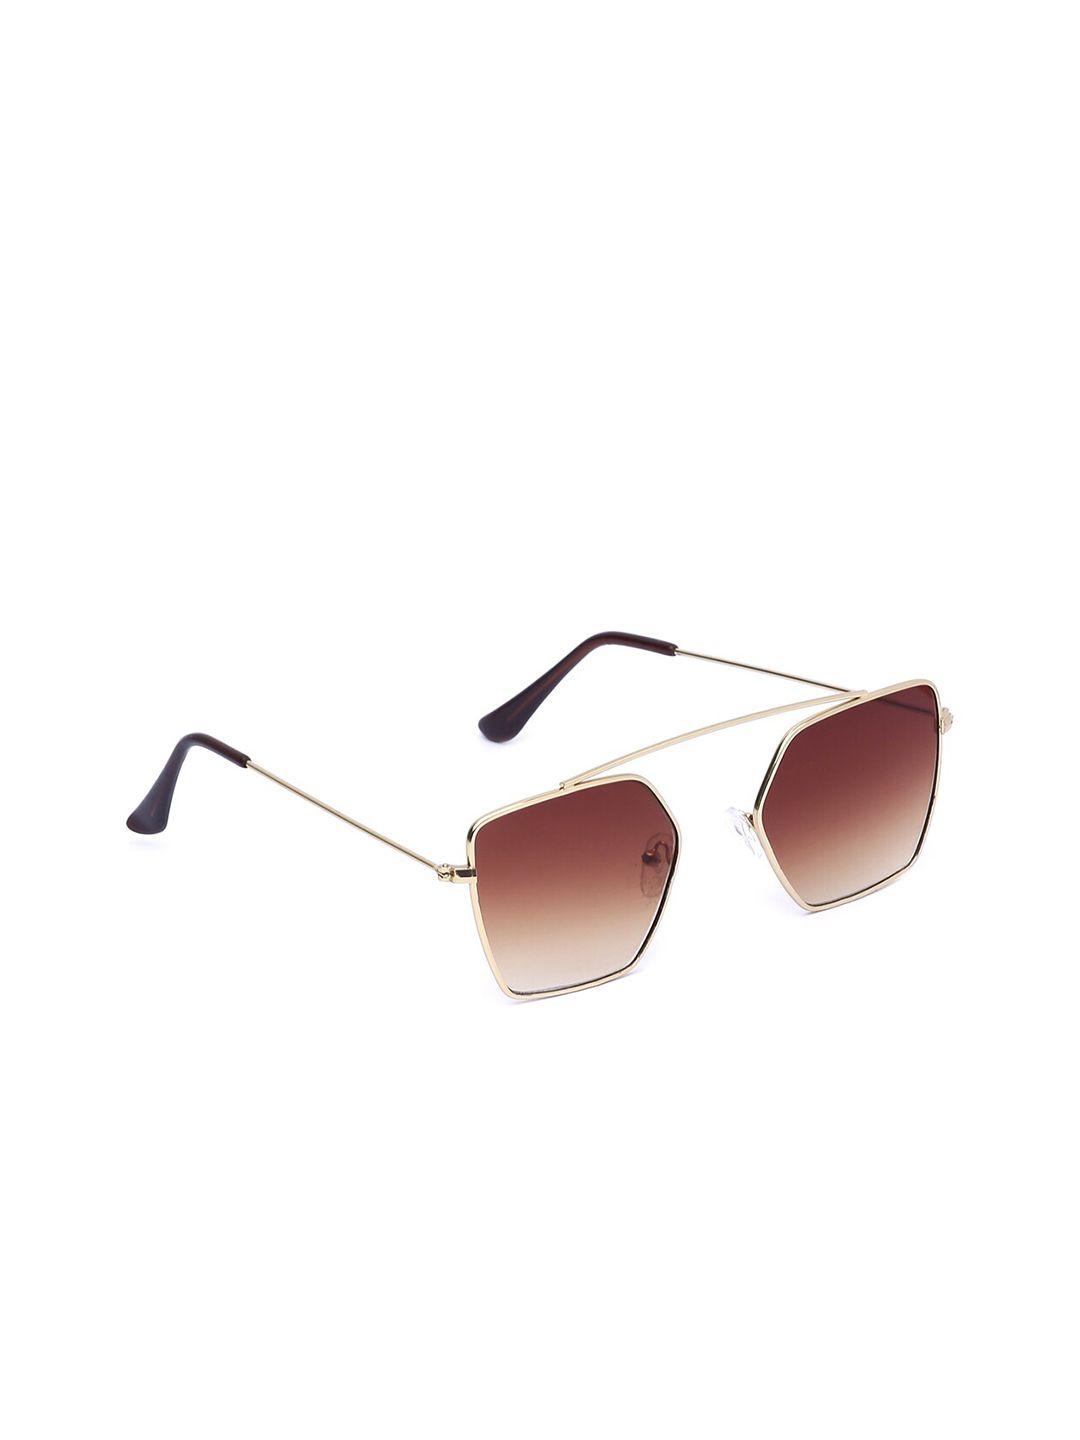 swiss design unisex brown lens & gold-toned browline sunglasses with uv protected lens